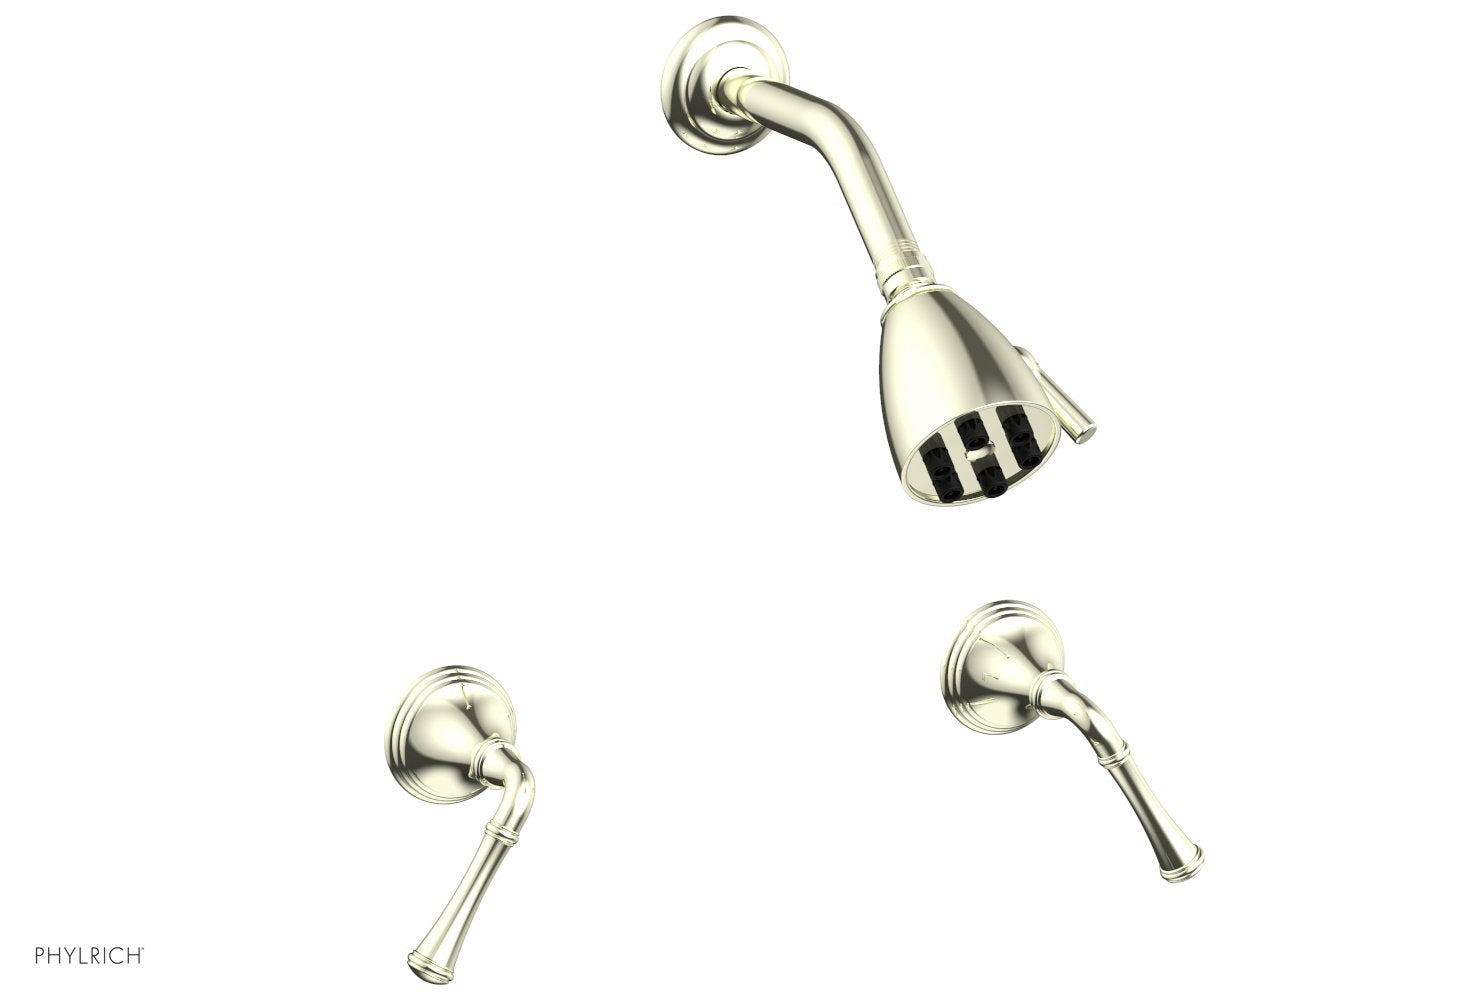 Phylrich 3RING Two Handle Shower Set